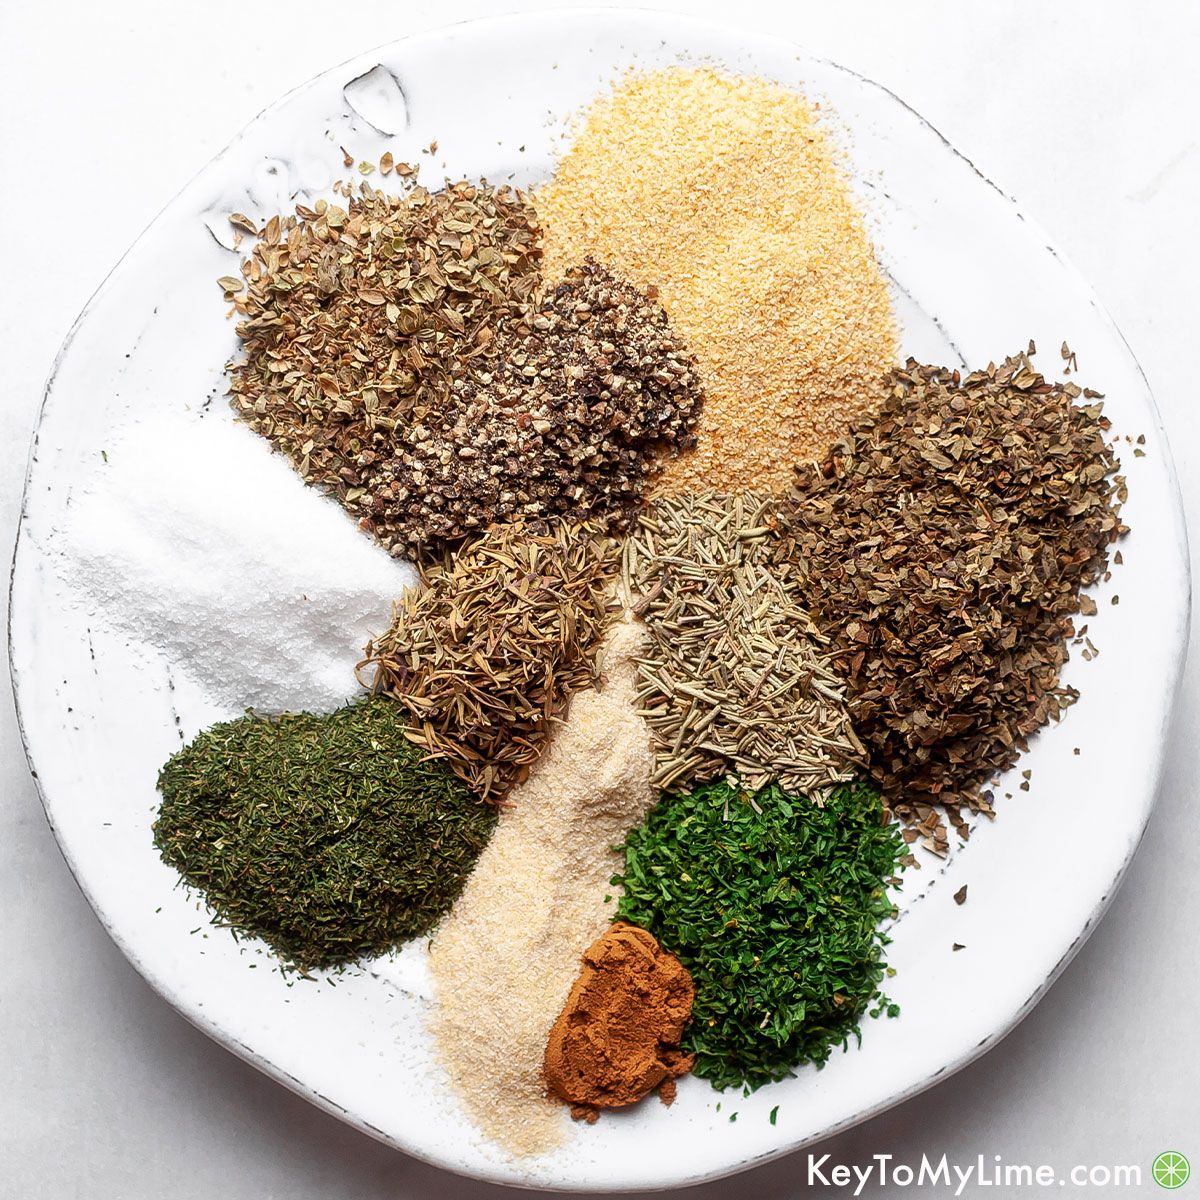 Best Spices & Recipes of 2020 - The Spice House